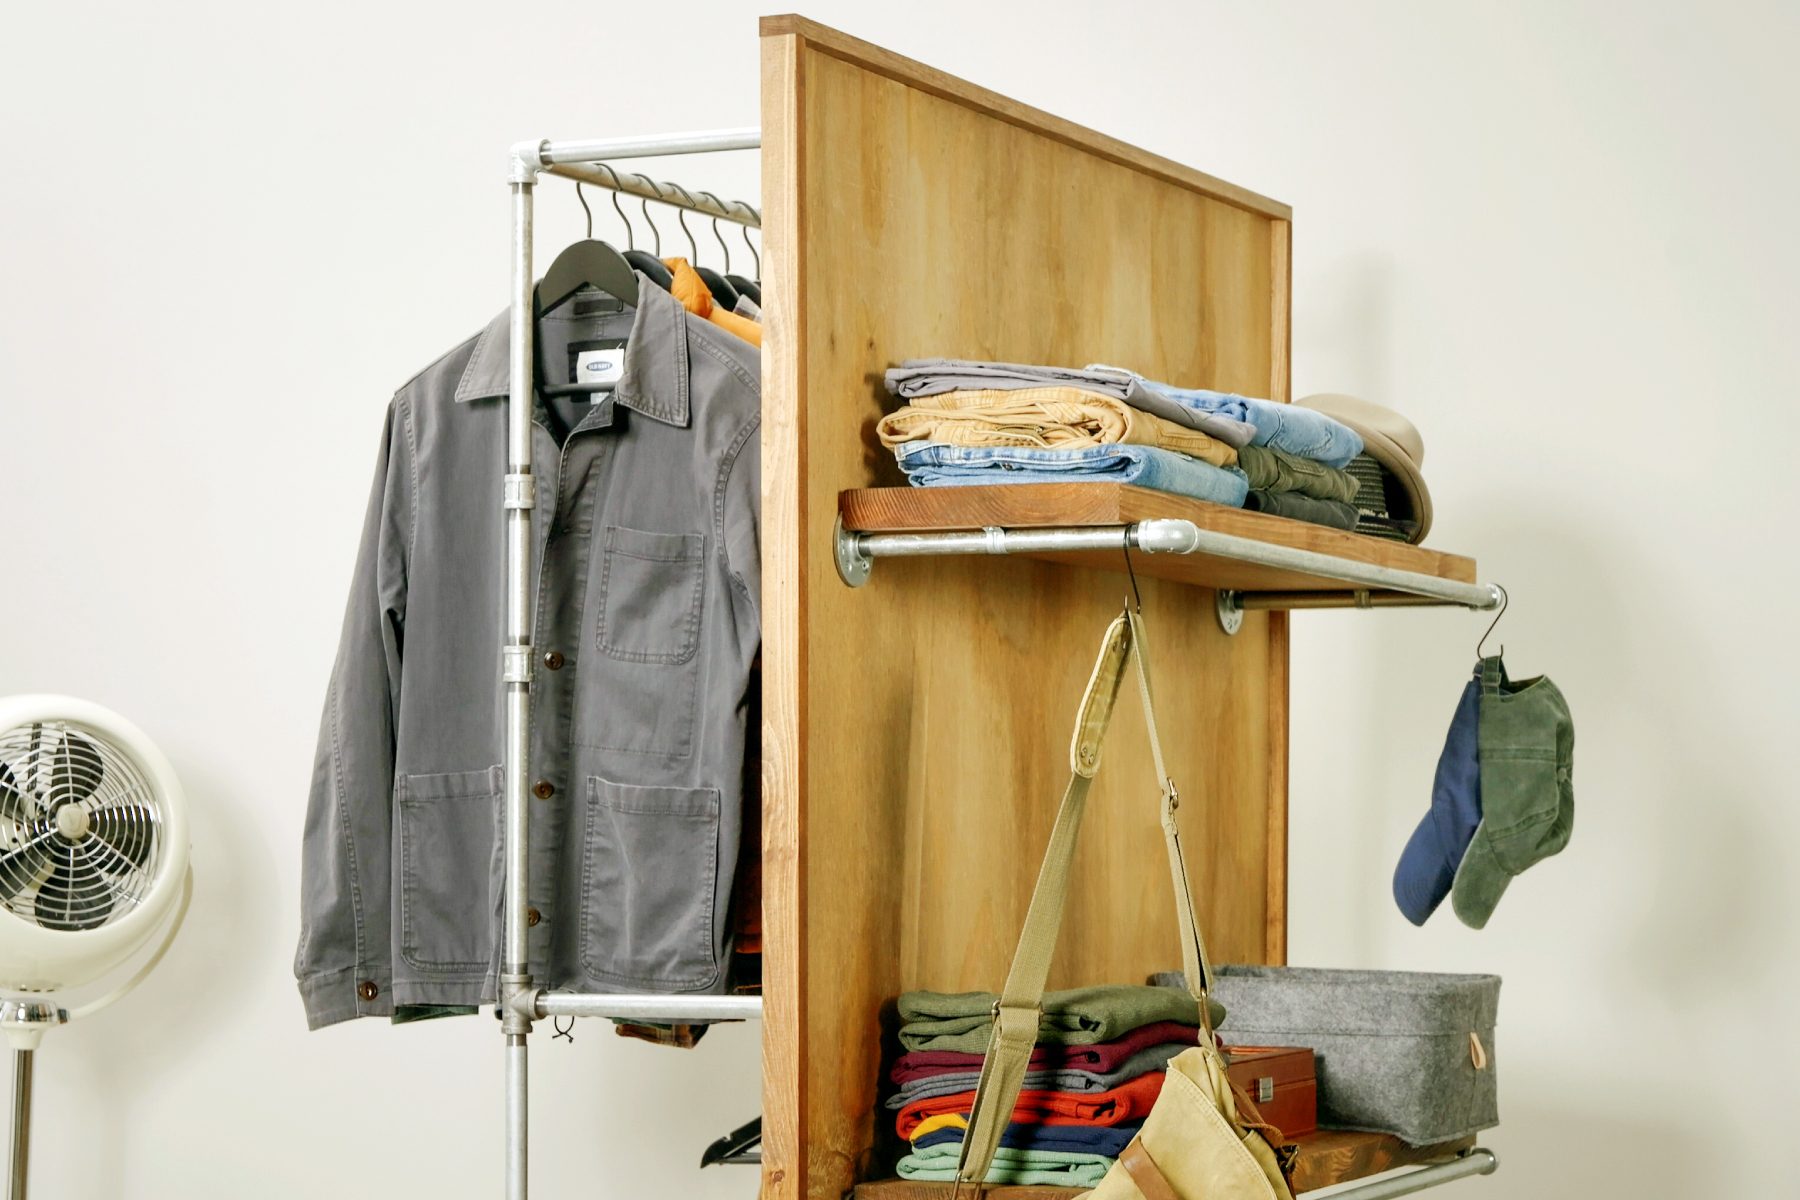 How To Make A Clothes Rack On Wheels Install the wood shelves